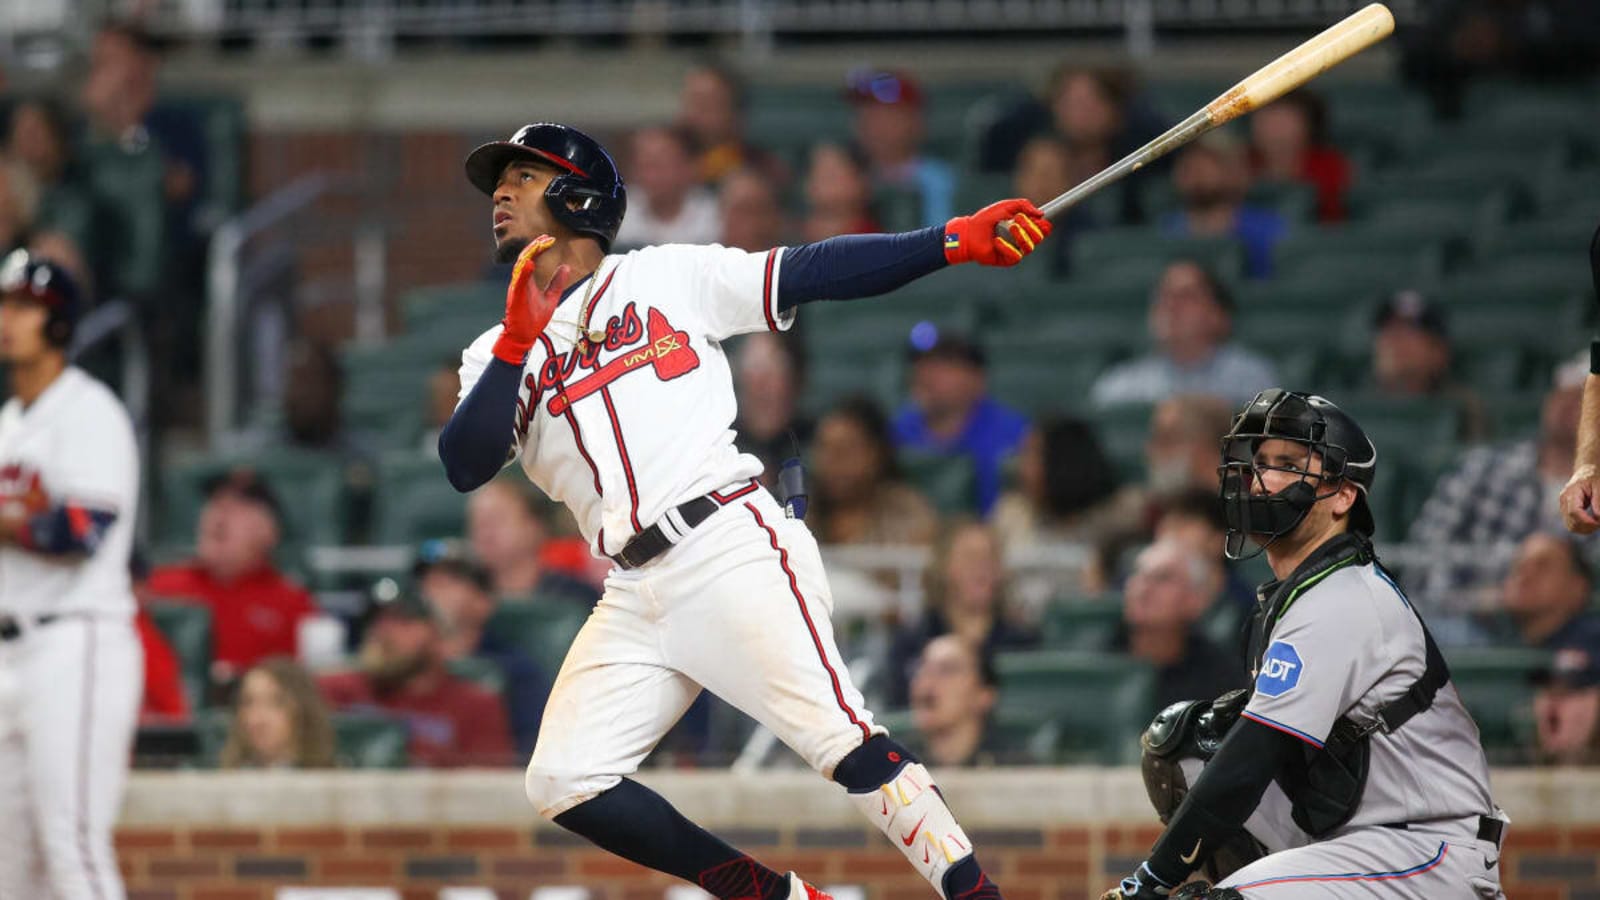 What is going on with Ozzie Albies?